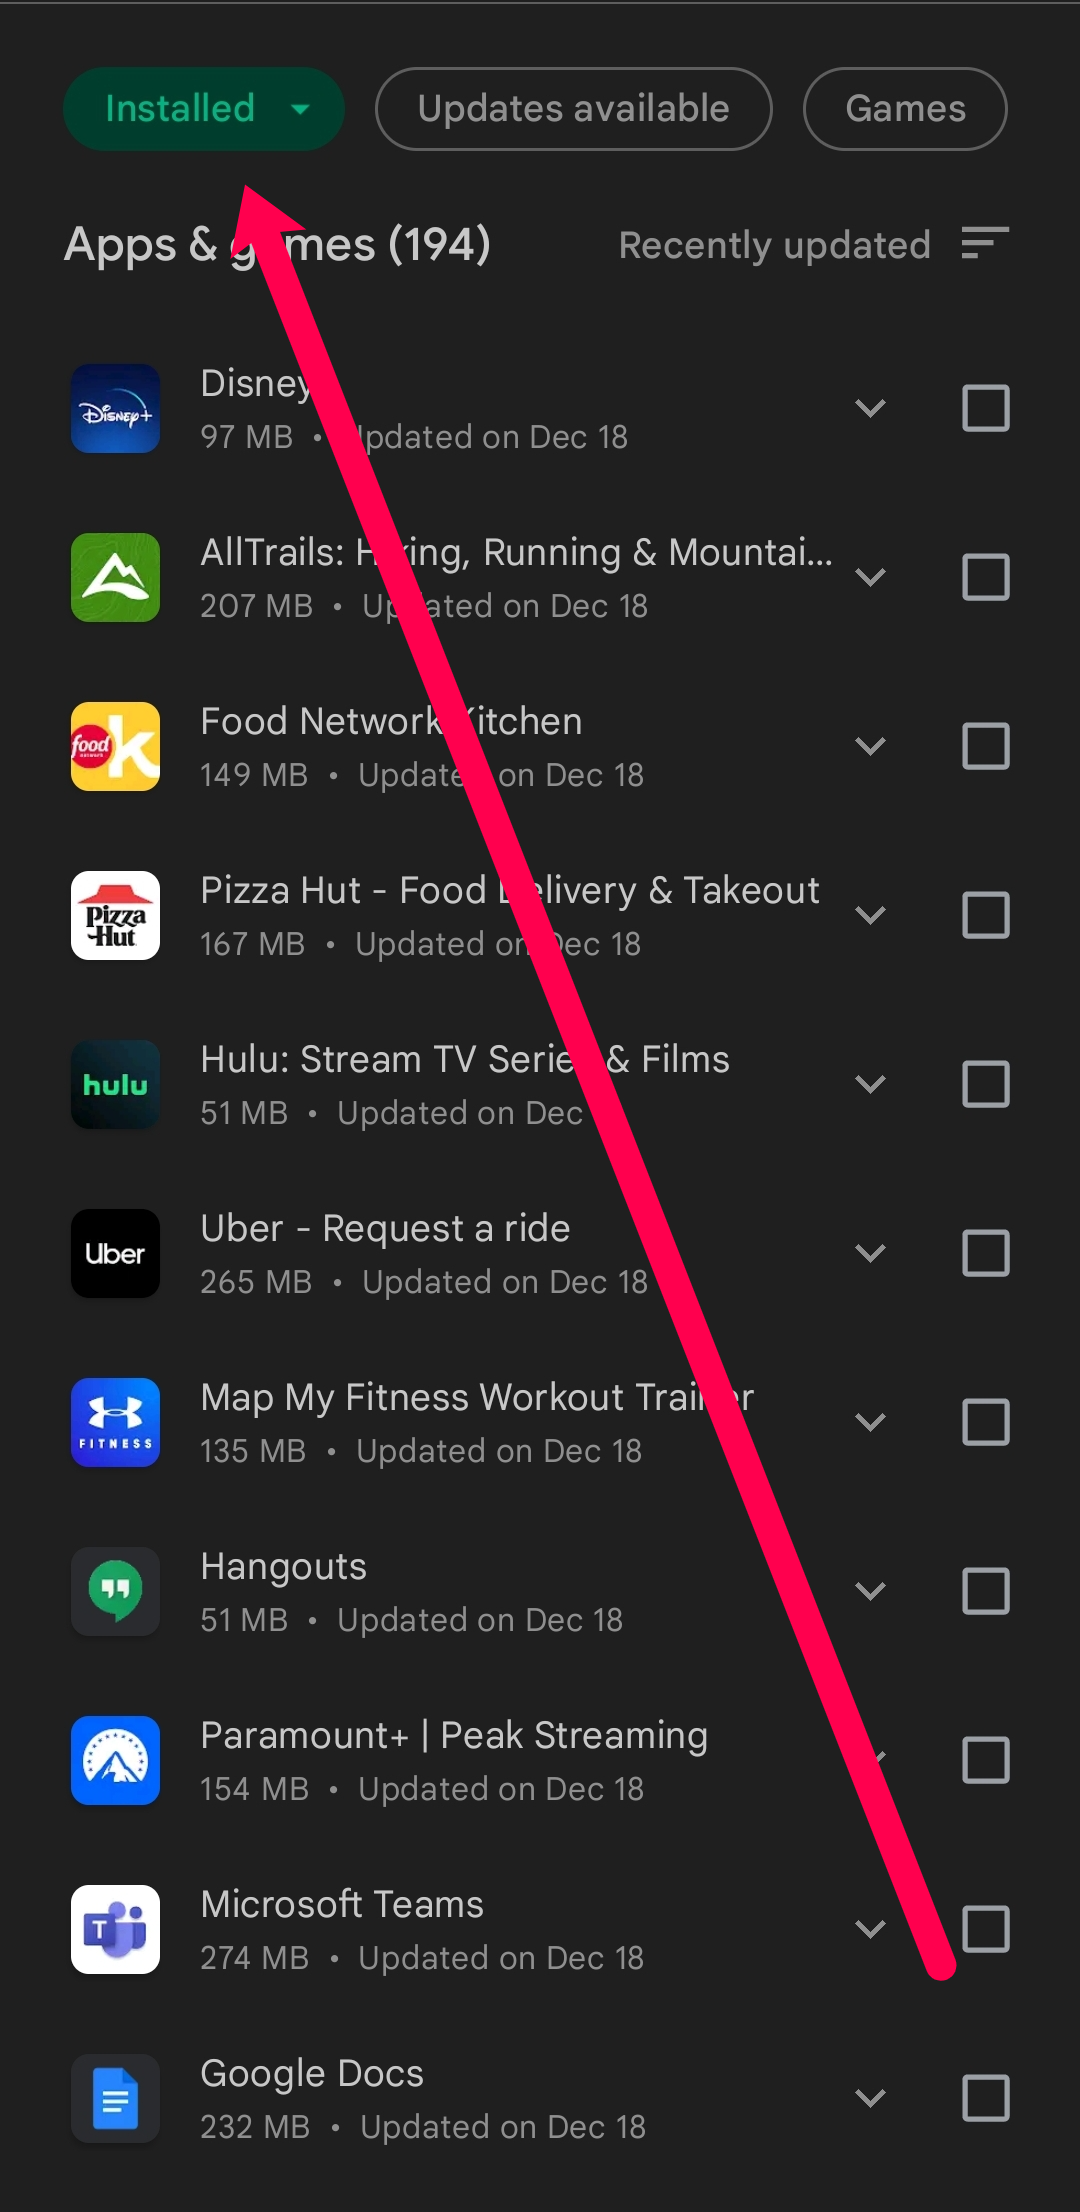 How do I find recently uninstalled apps?